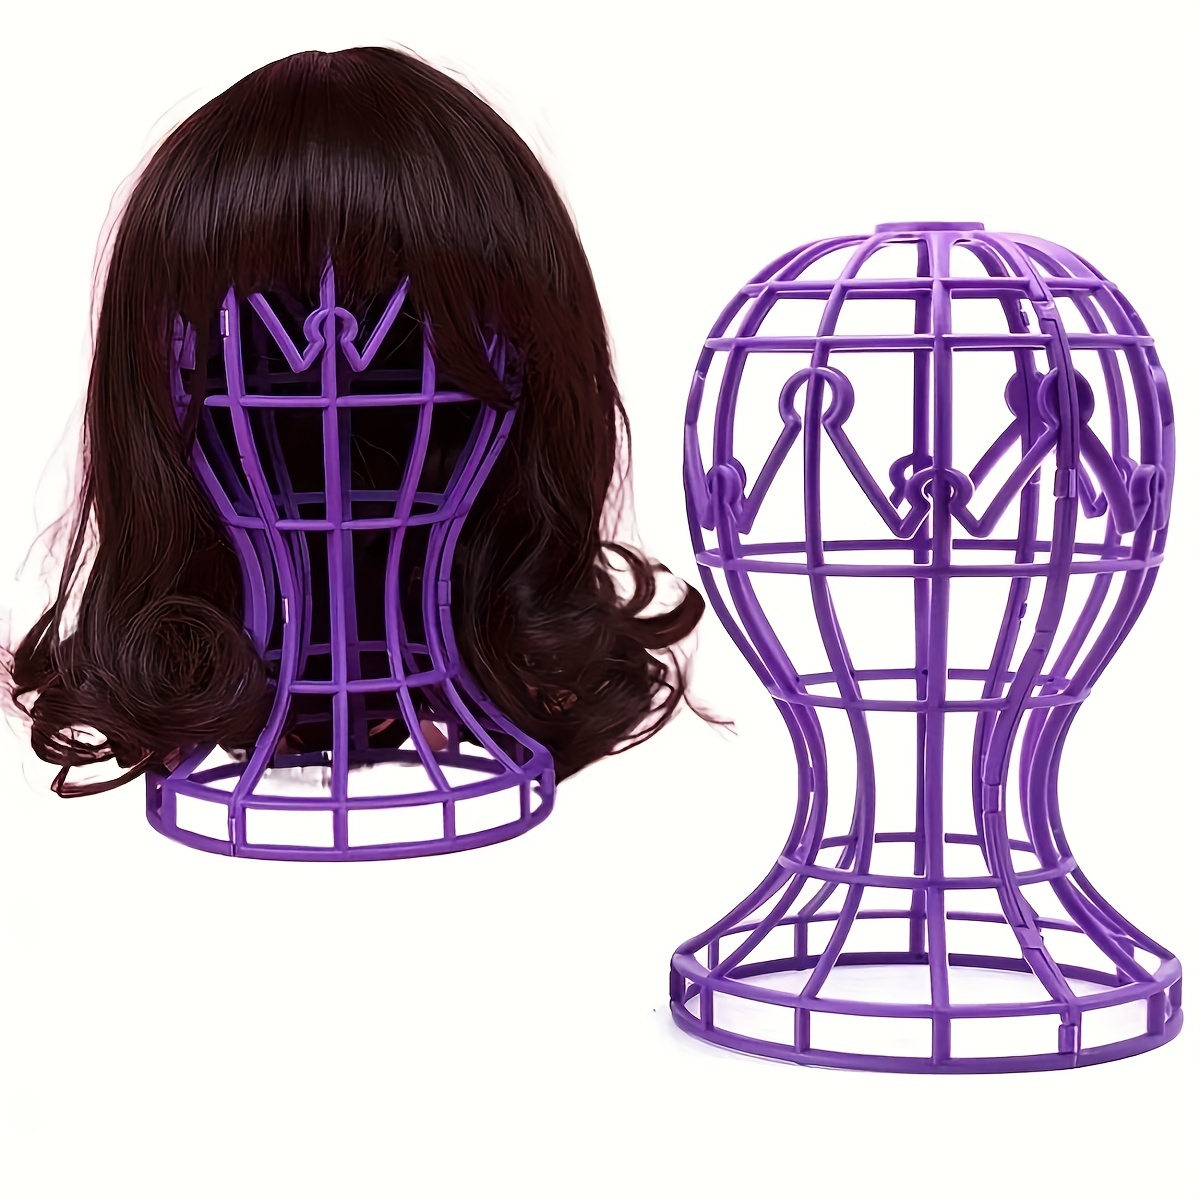 3 Pack Folding Portable Wig Holder - Wig and Hat Accessories - Hair  Sensibles Wigs & More